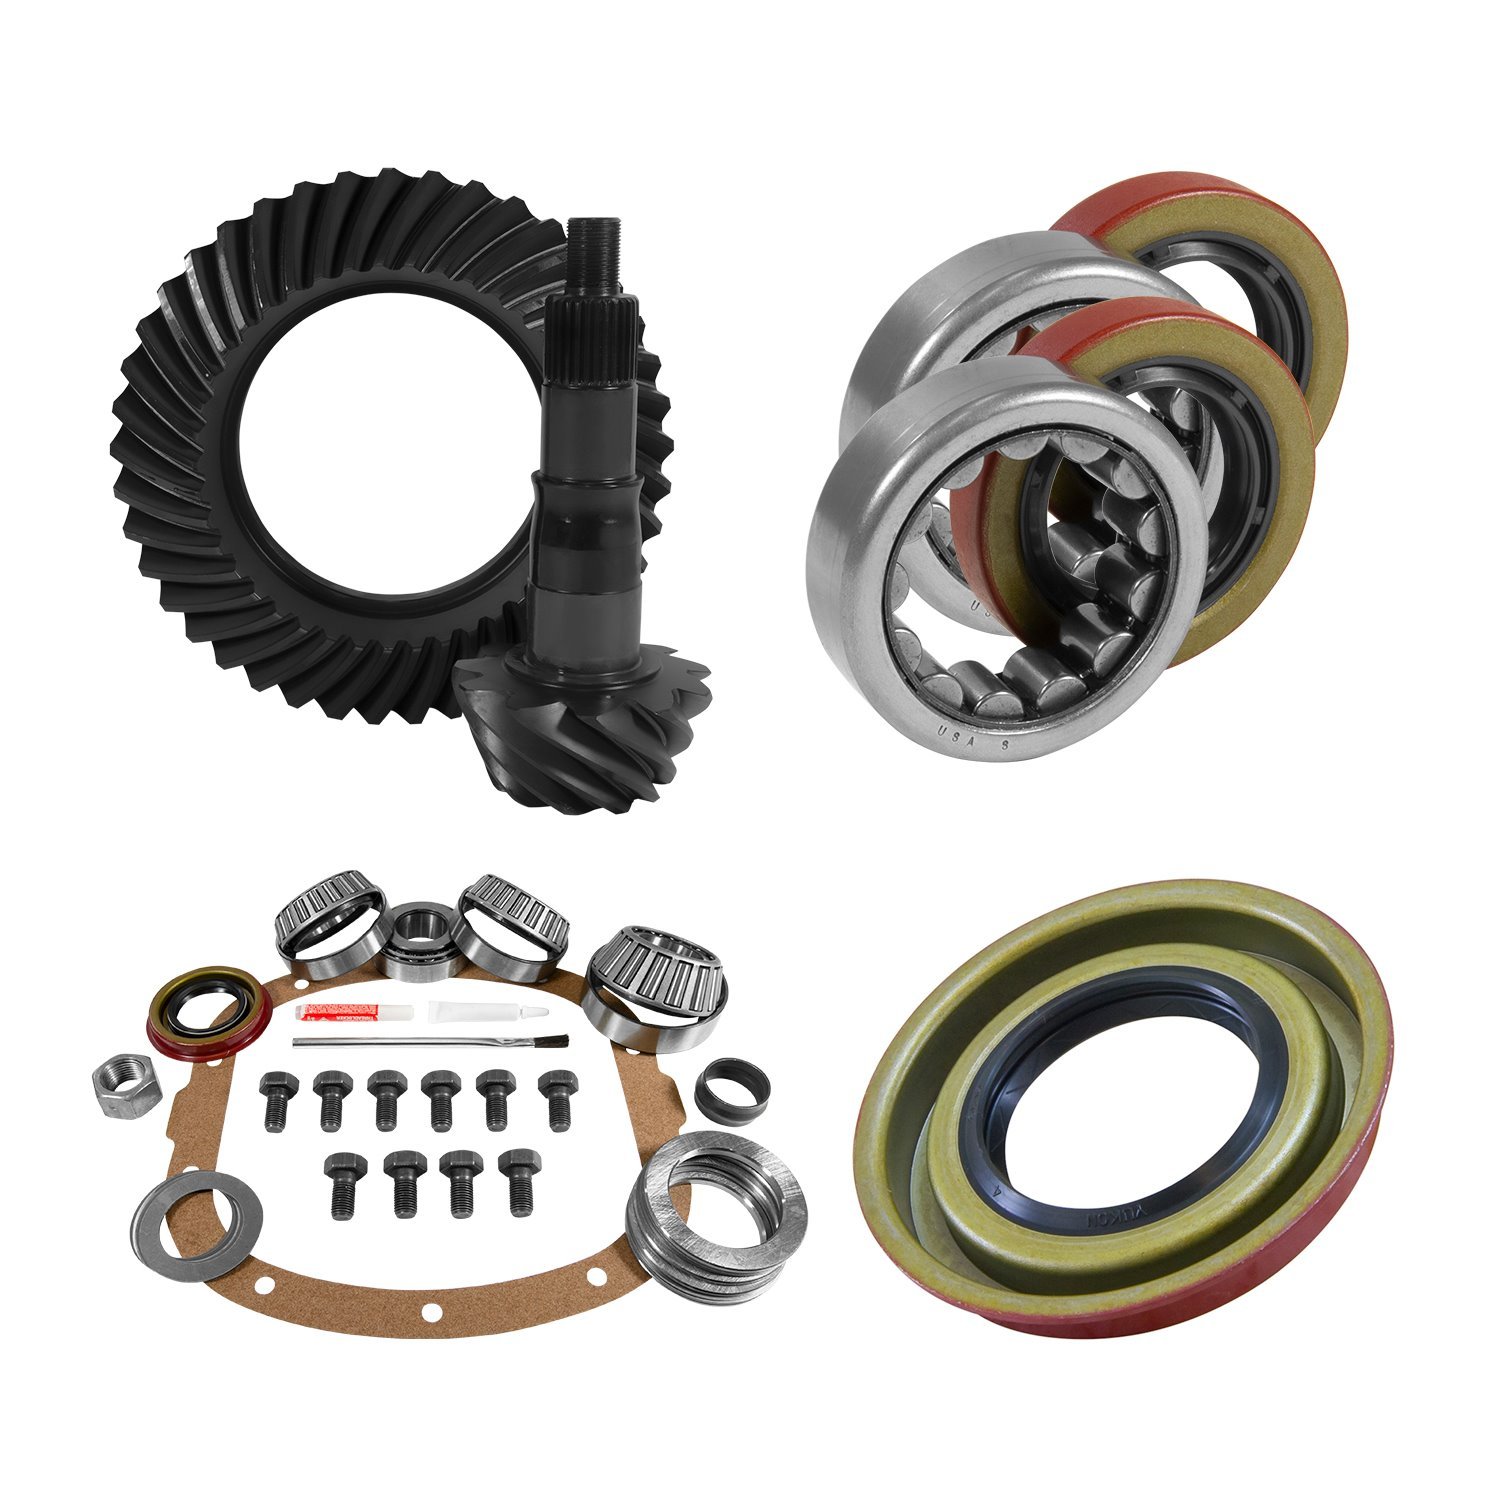 USA Standard 10691 7.5 in./7.625 in. GM 3.23 Rear Ring & Pinion Install Kit, 2.25 in. Od Axle Bearings